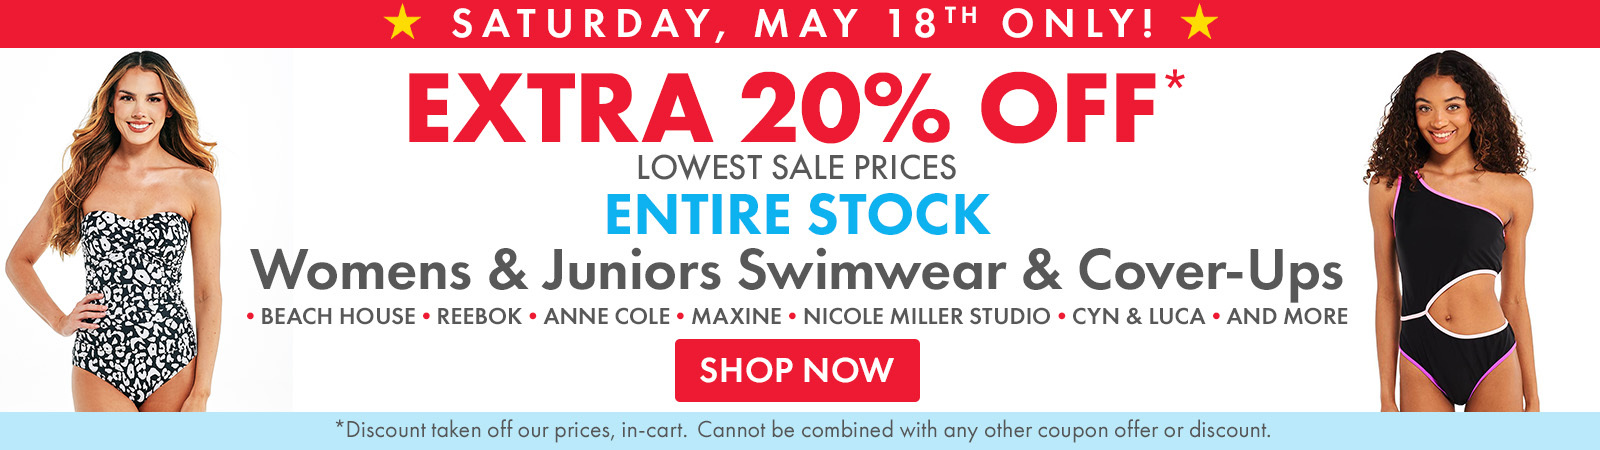 May 18th Only - Extra 20% Off Entire Stock Womens & Juniors Swimwear & Cover Ups